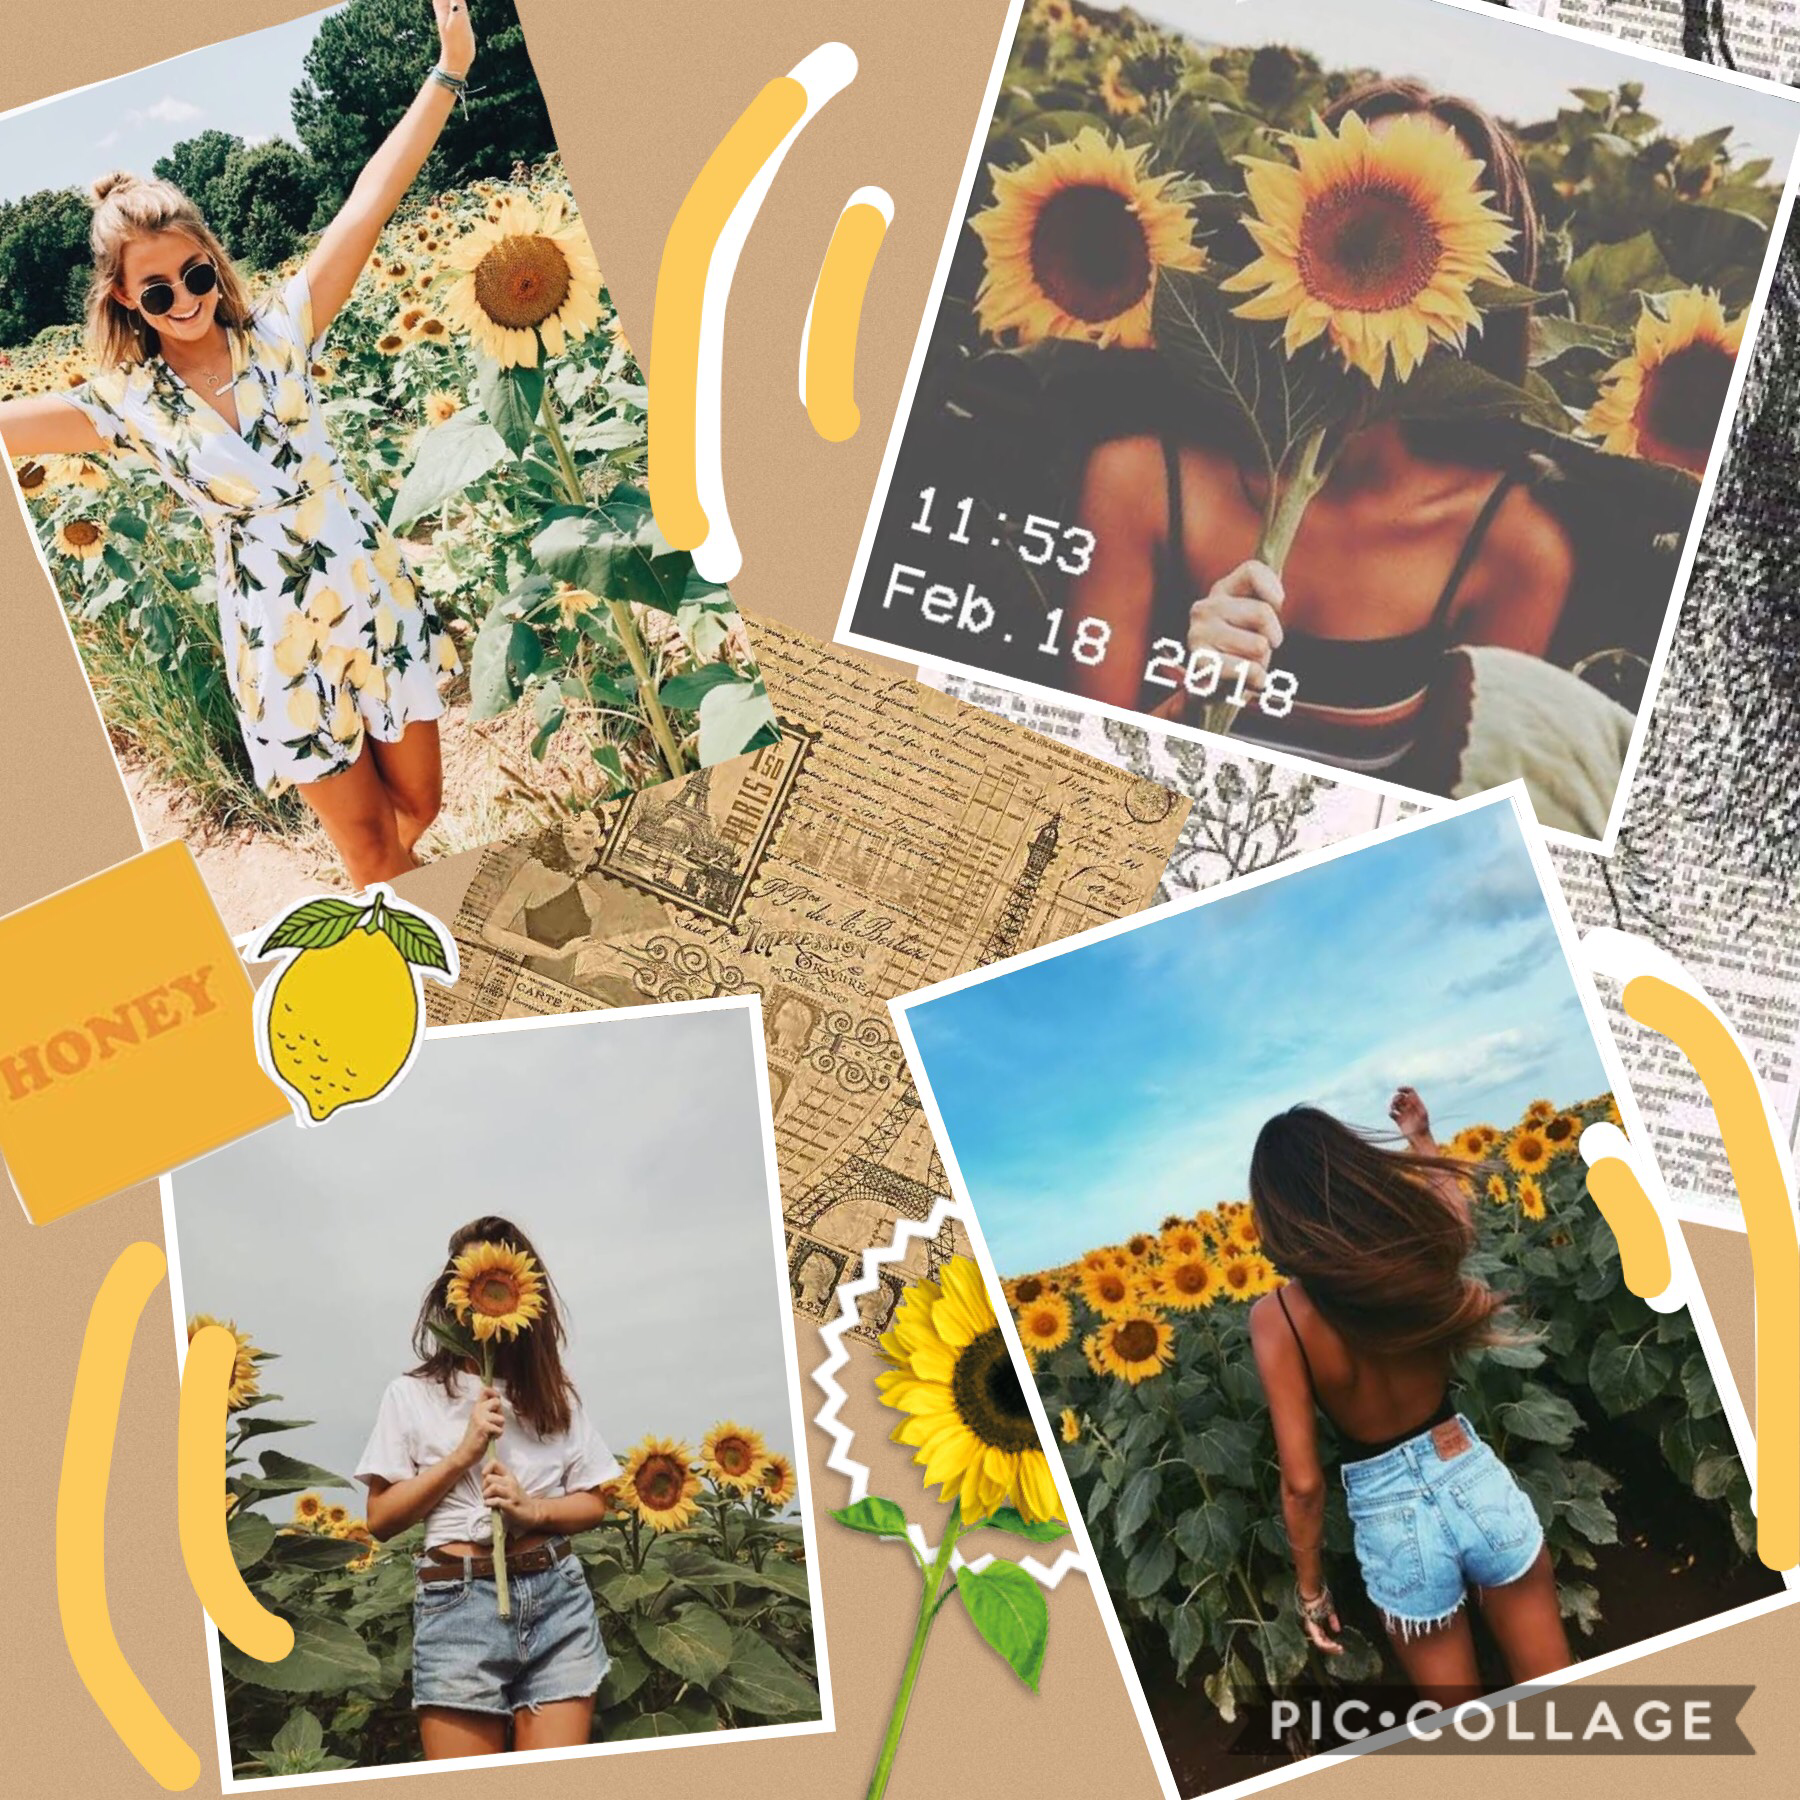 Hey guys! I’m new here, I hope you like my first collage 🌻